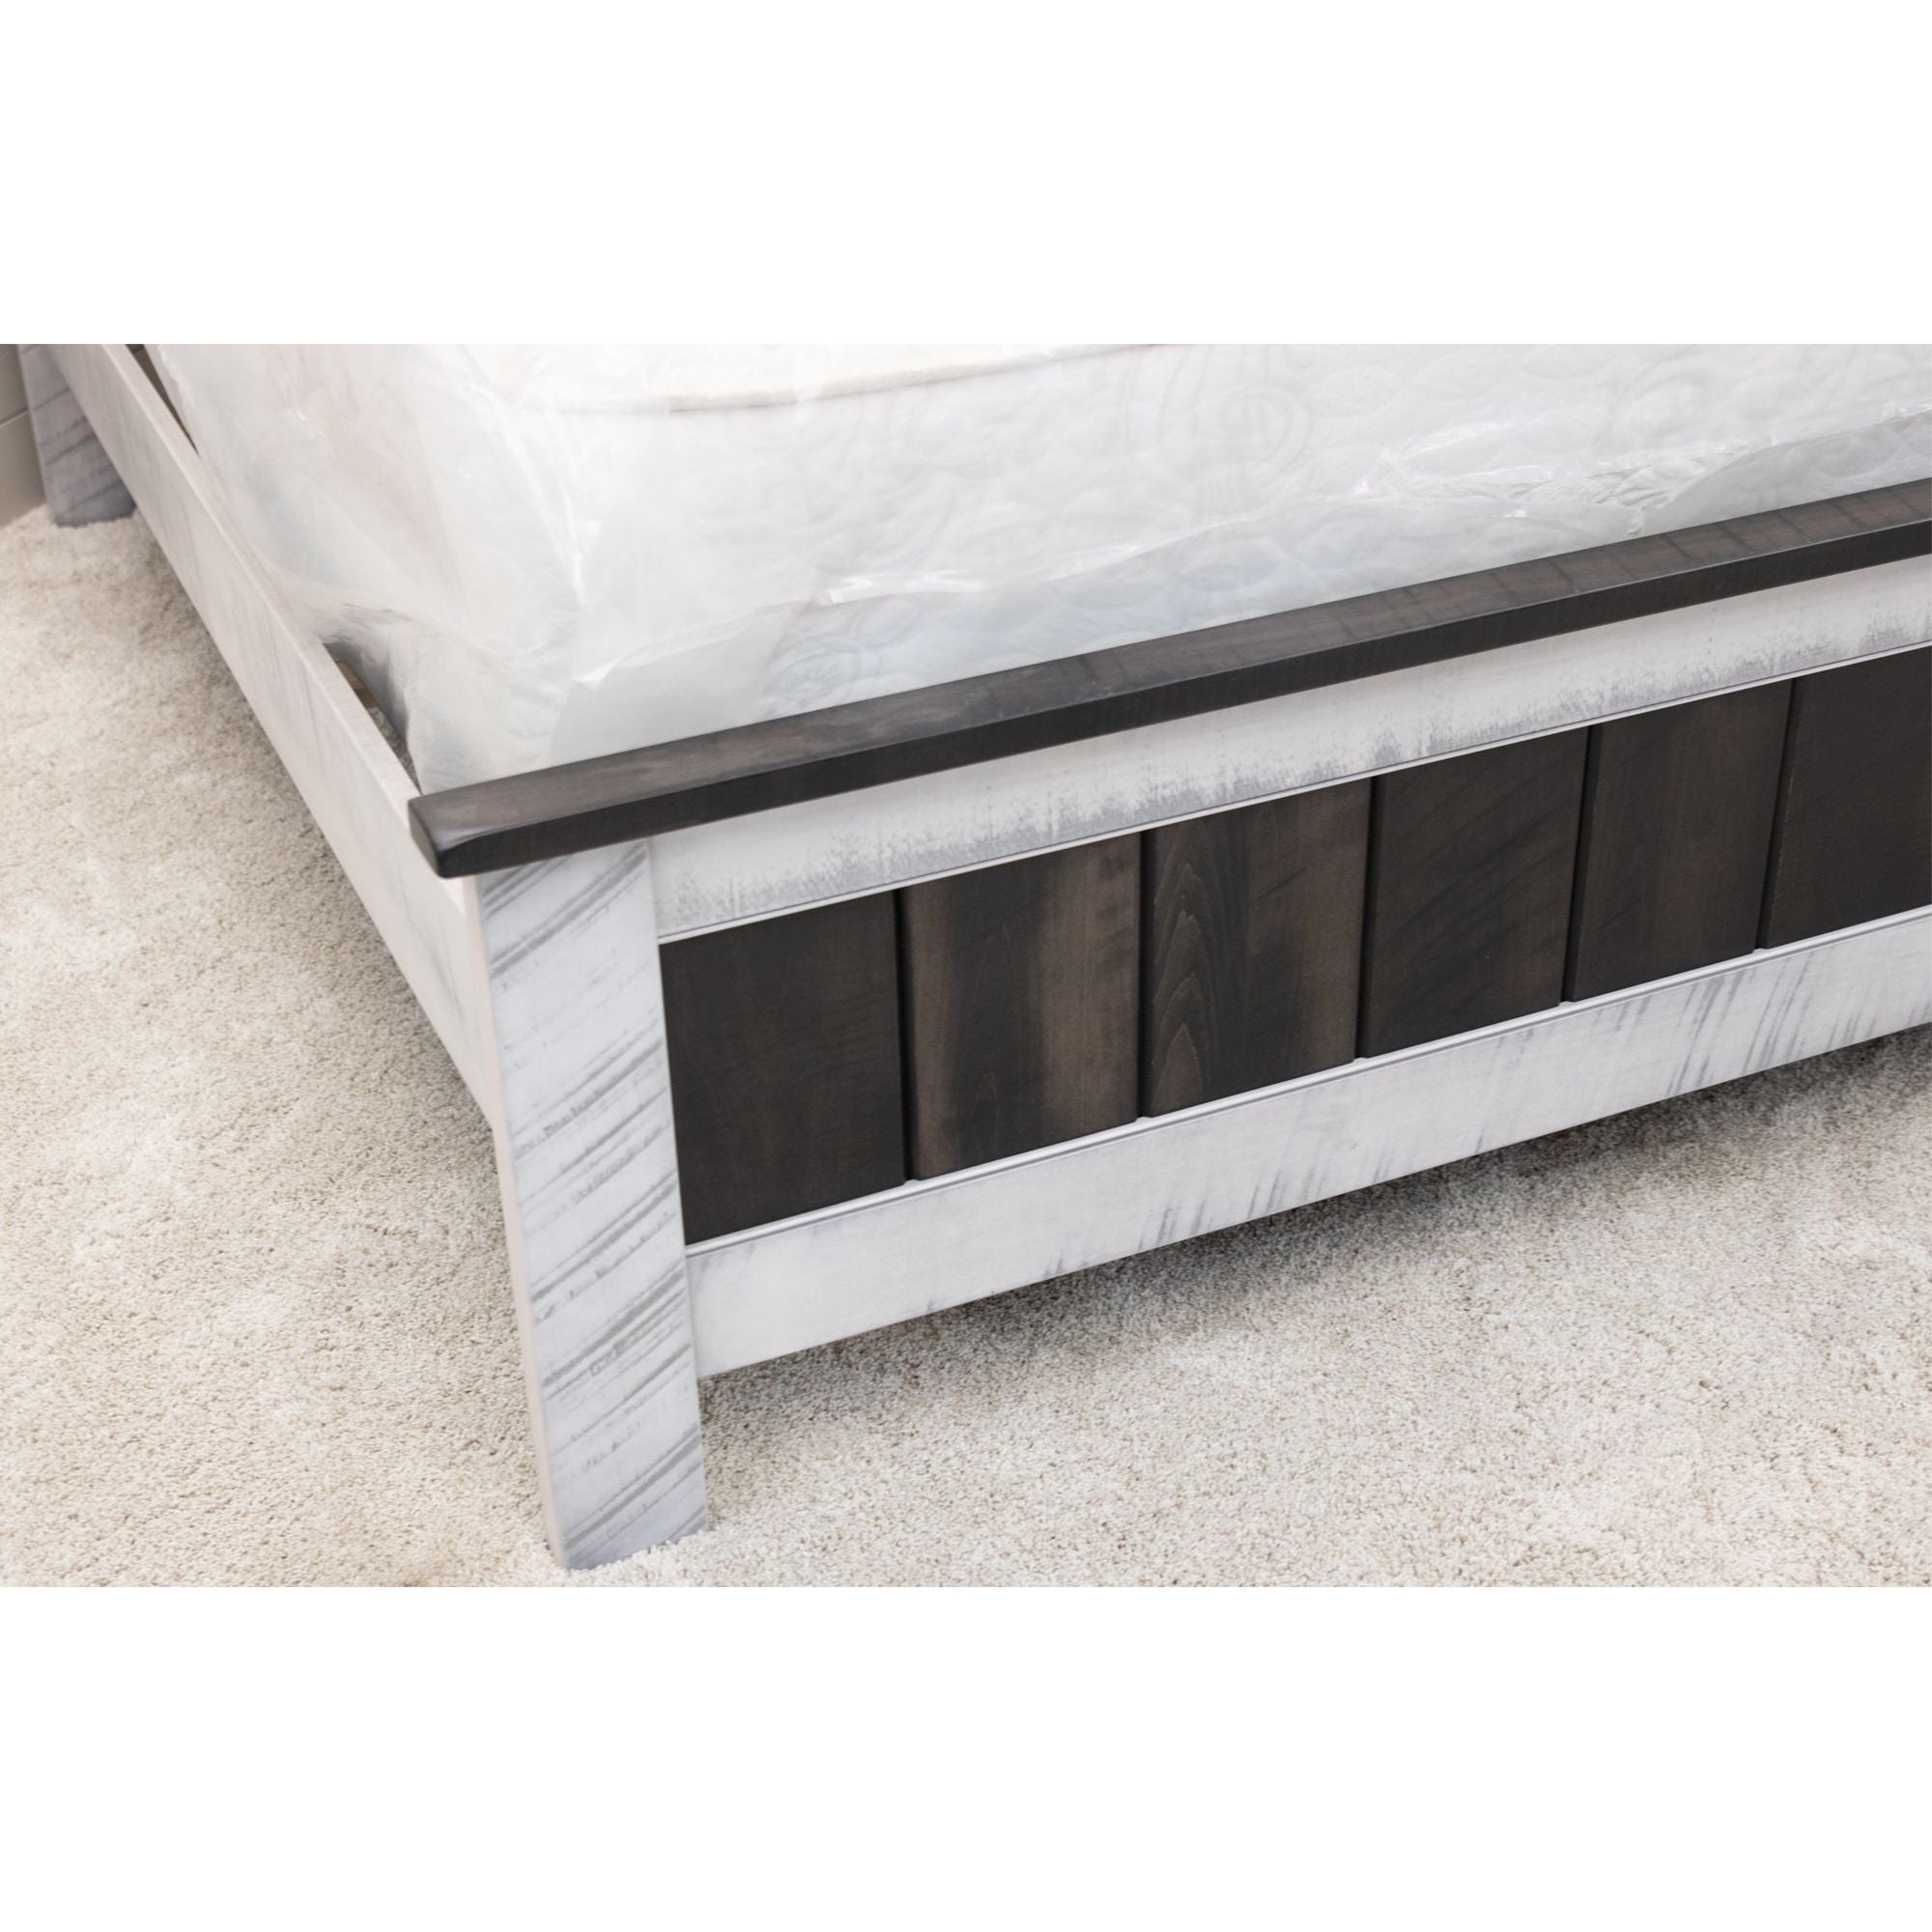 Cambria King Bed